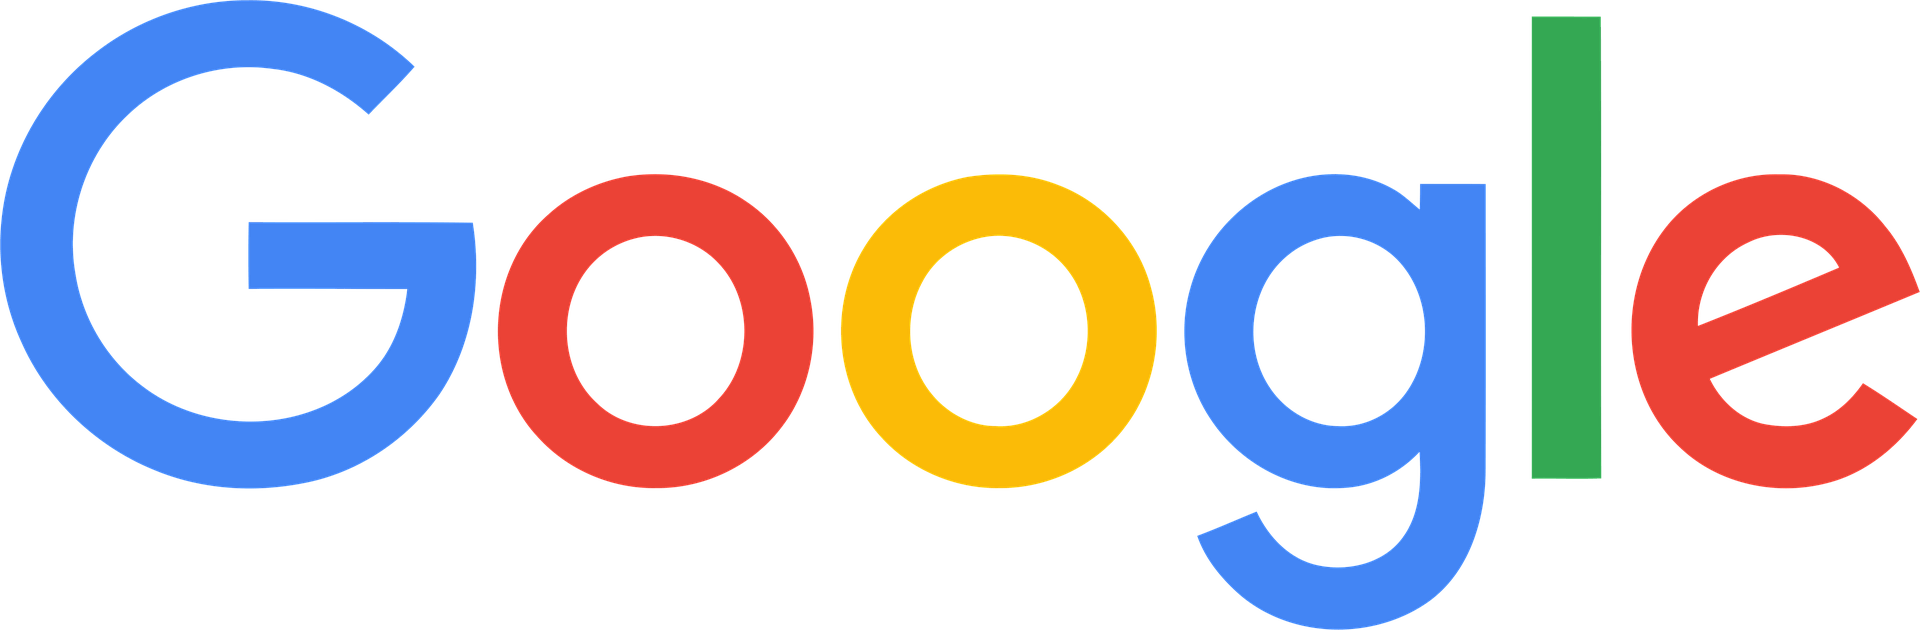 A colorful google logo on a white background